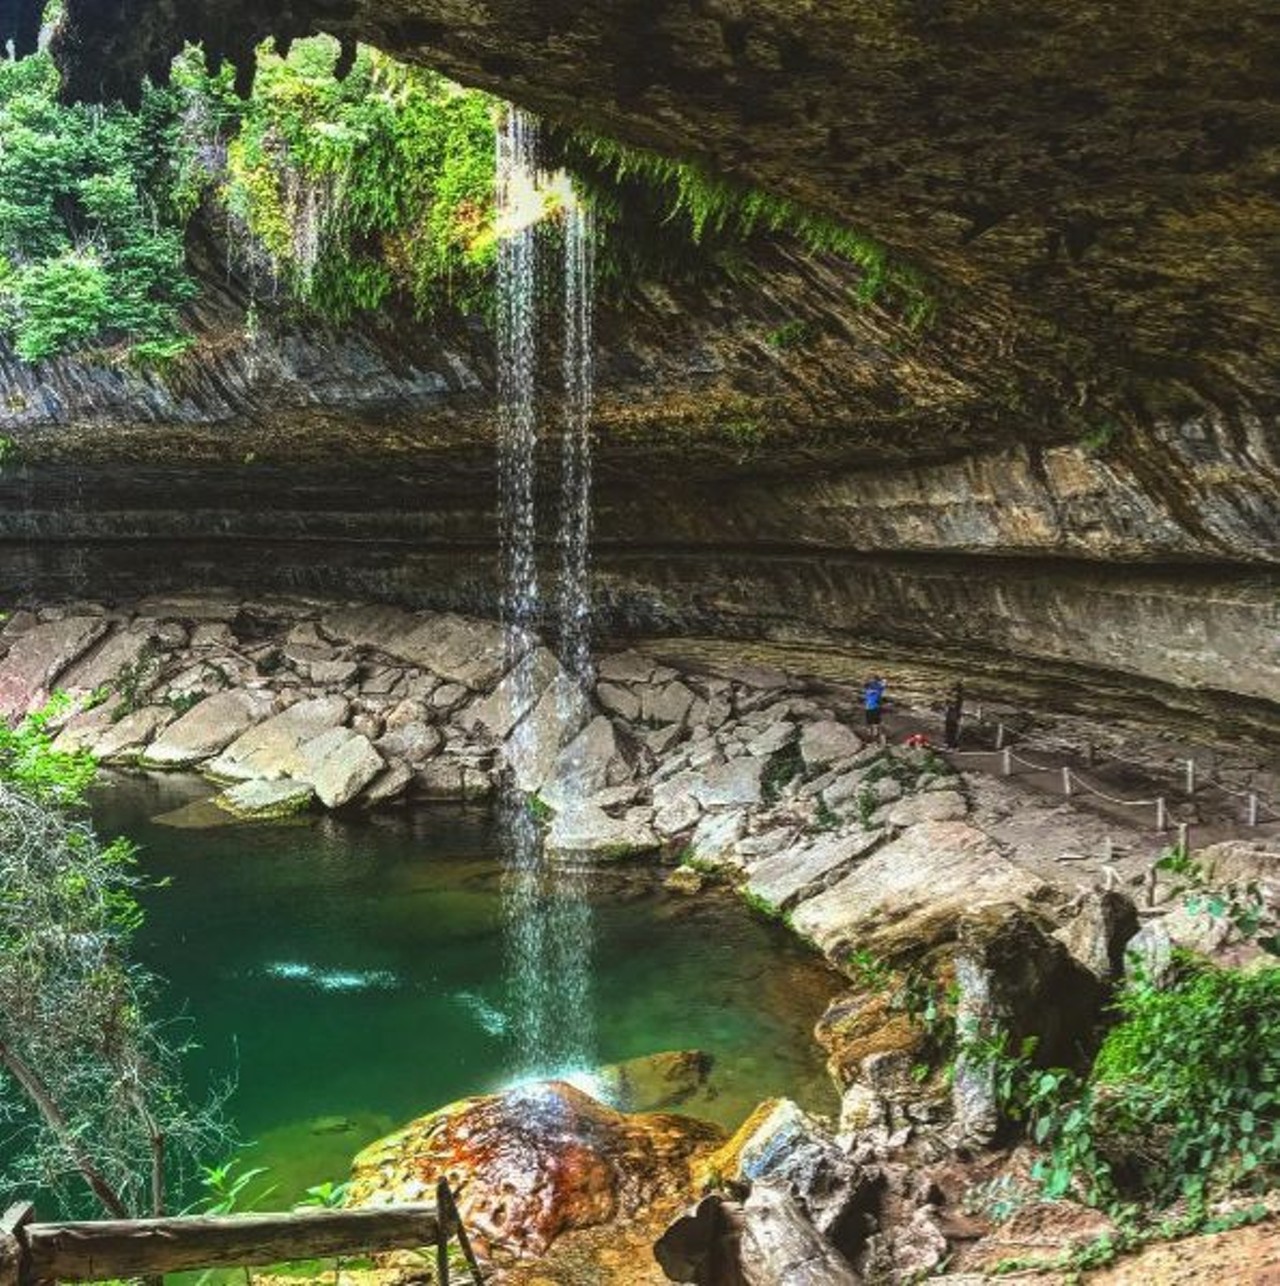 Hamilton Pool
24300 Hamilton Pool Road, Dripping Springs, (512) 264-2740
This gorgeous summer getaway is no doubt one of the most scenic swimming holes in Texas. Surrounded by the remains of a collapsed underground river, Hamilton Pool is a top spot for summer fun and photo op&#146;s. Be sure to make reservations ahead of time, and split the cost with up to 7 of your friends to make this trip a cheap one. Check out the park website for details on how to execute a plan. 
Photo via Instagram, farwaaaa